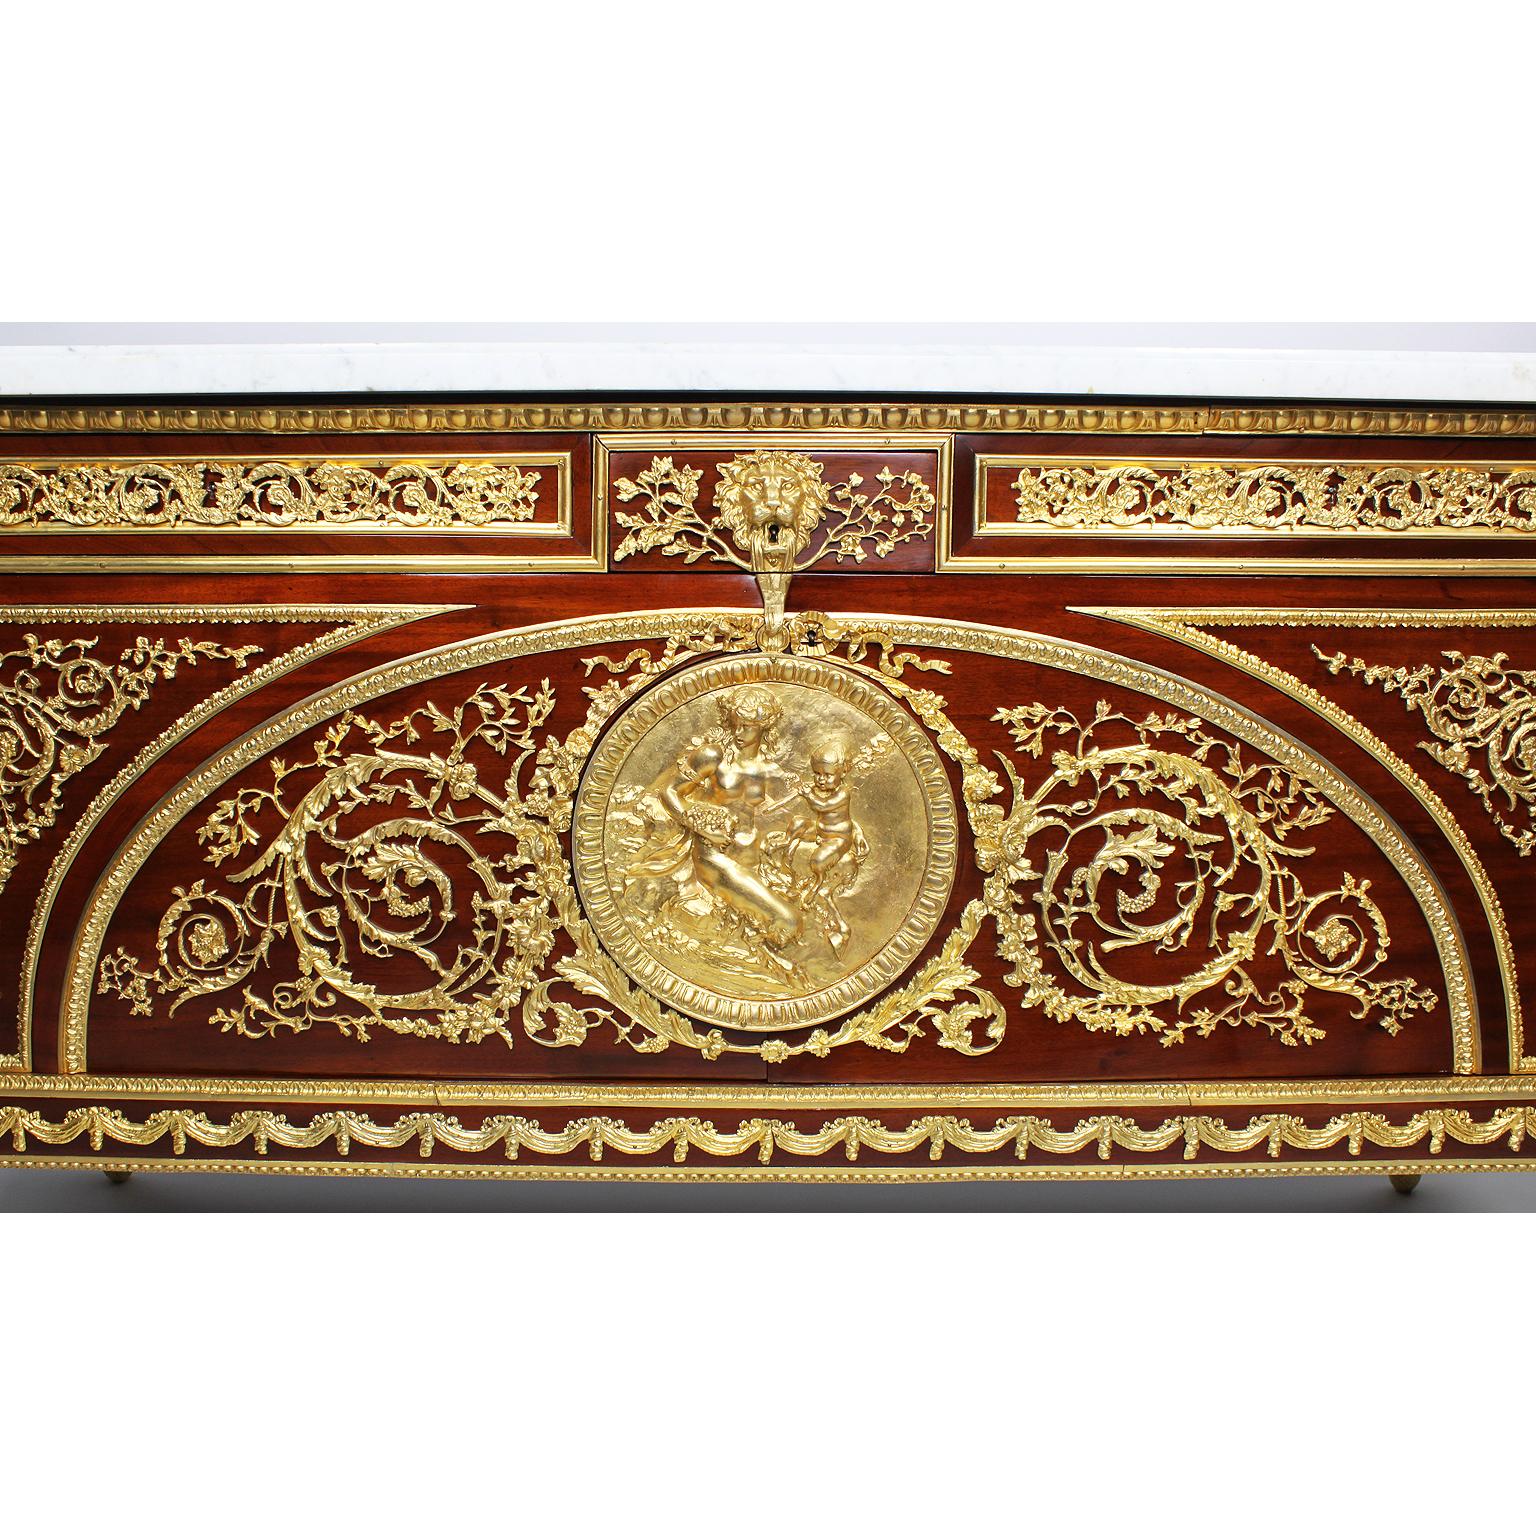 A French Louis XVI style mahogany and gilt-bronze mounted 